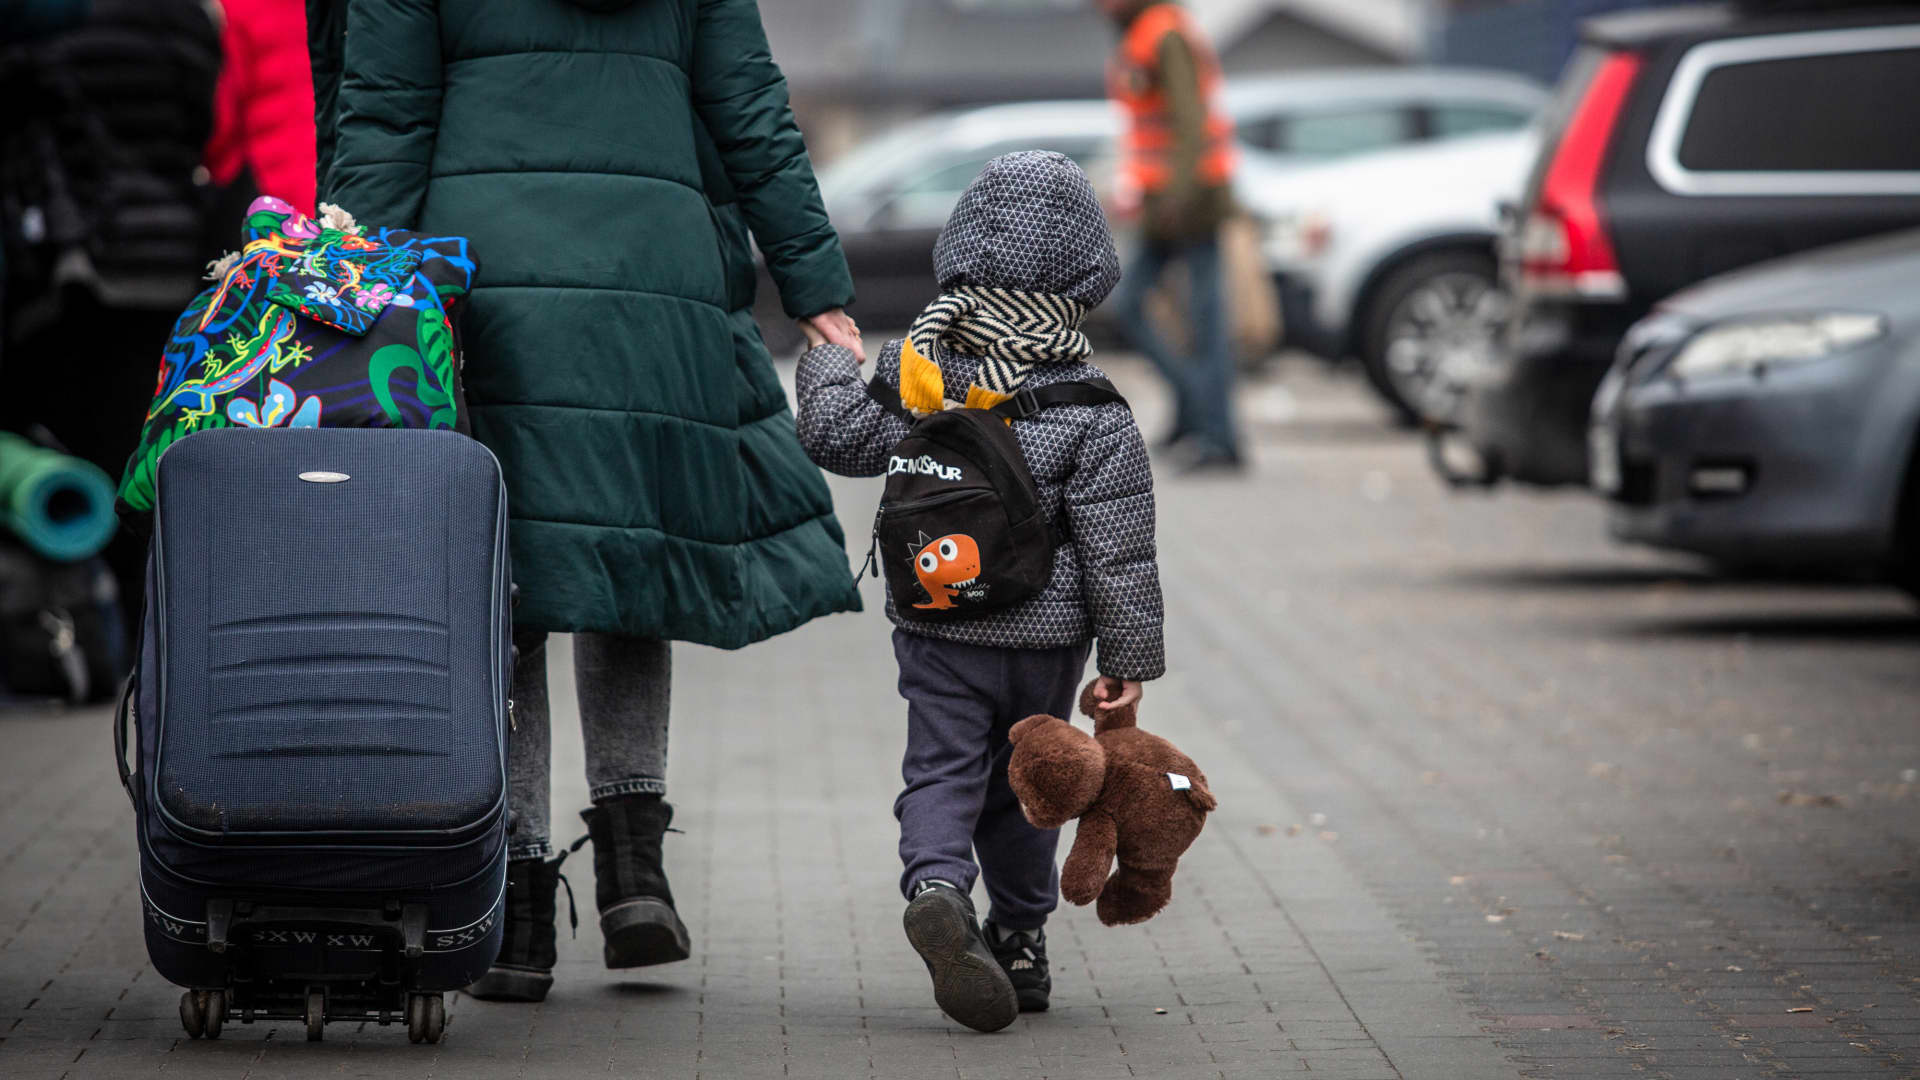 A displaced Ukrainian and child make their way to board a bus for onward travel at a temporary refugee center, setup at a disused Tesco building, in Przemysl, Poland, on Wednesday, March 16, 2022.